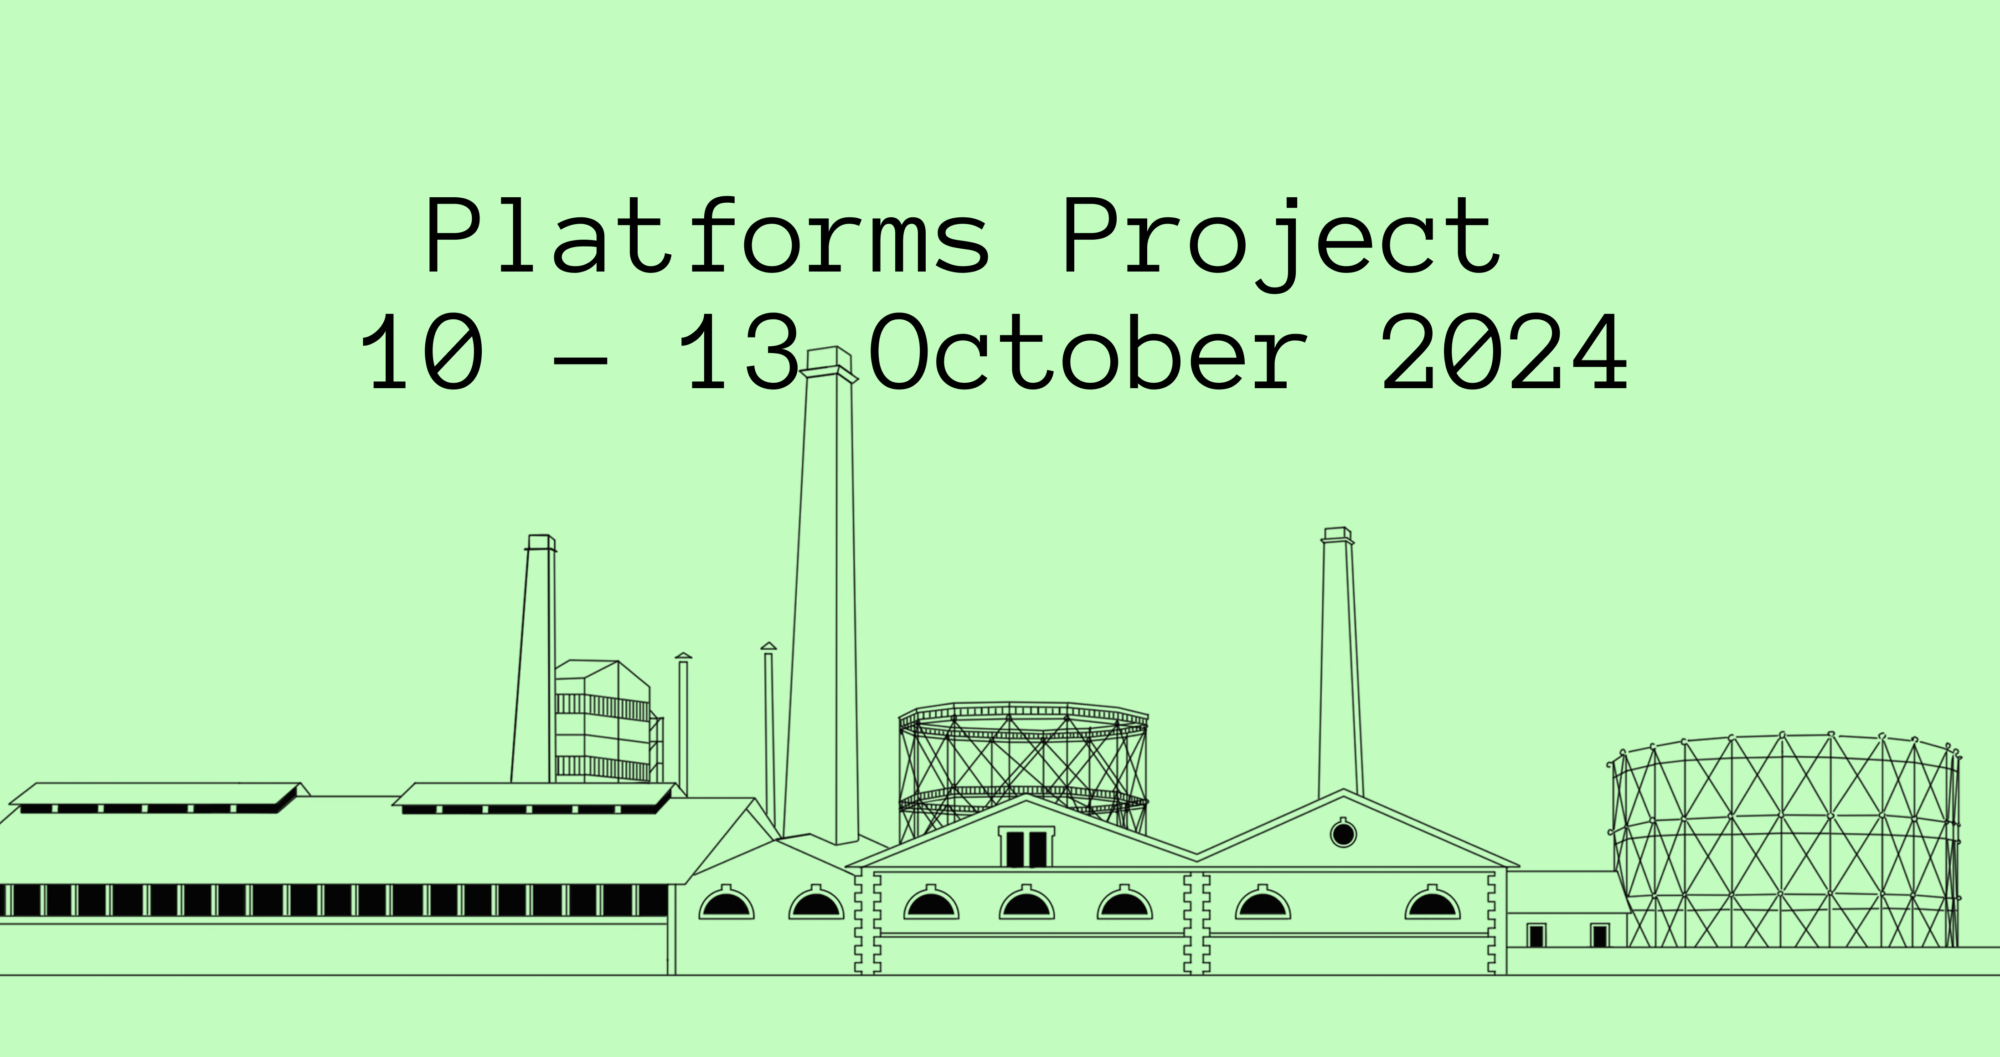 platforms project 2024 banner for mobile devices